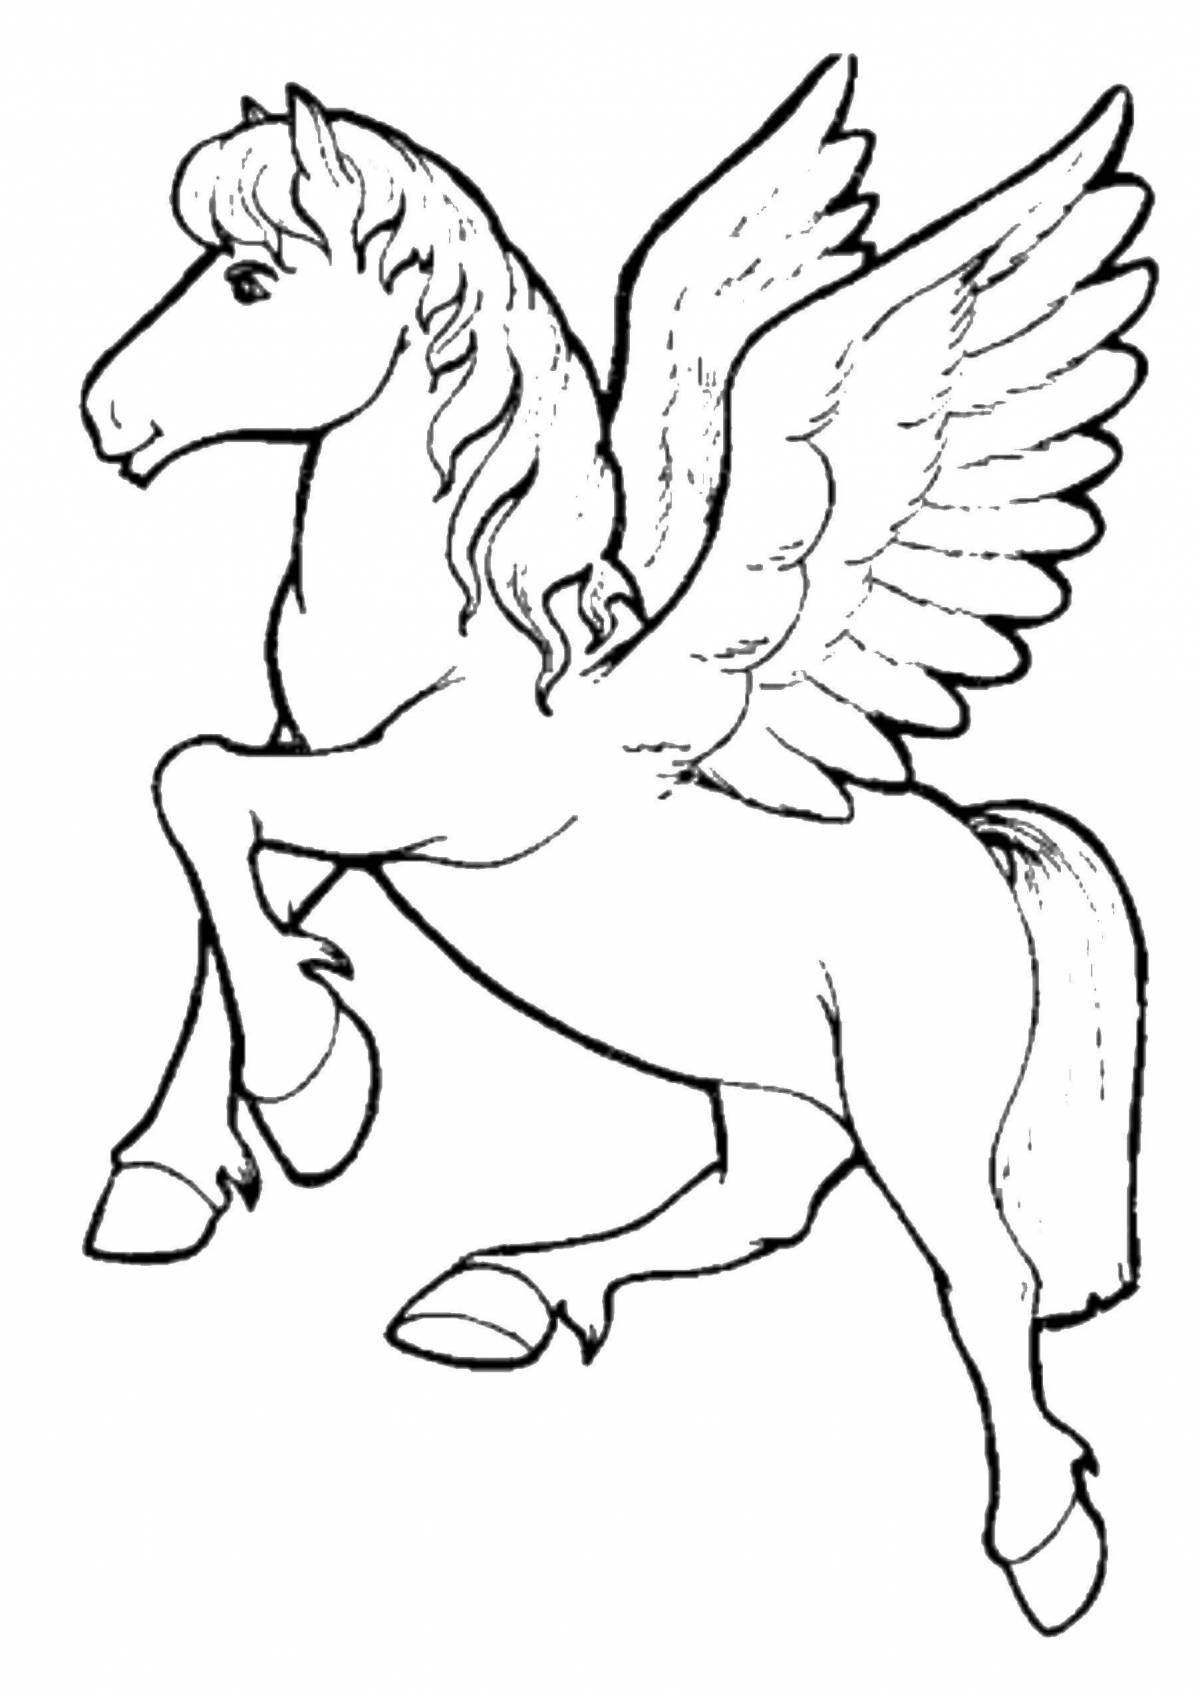 Great coloring of a horse with wings